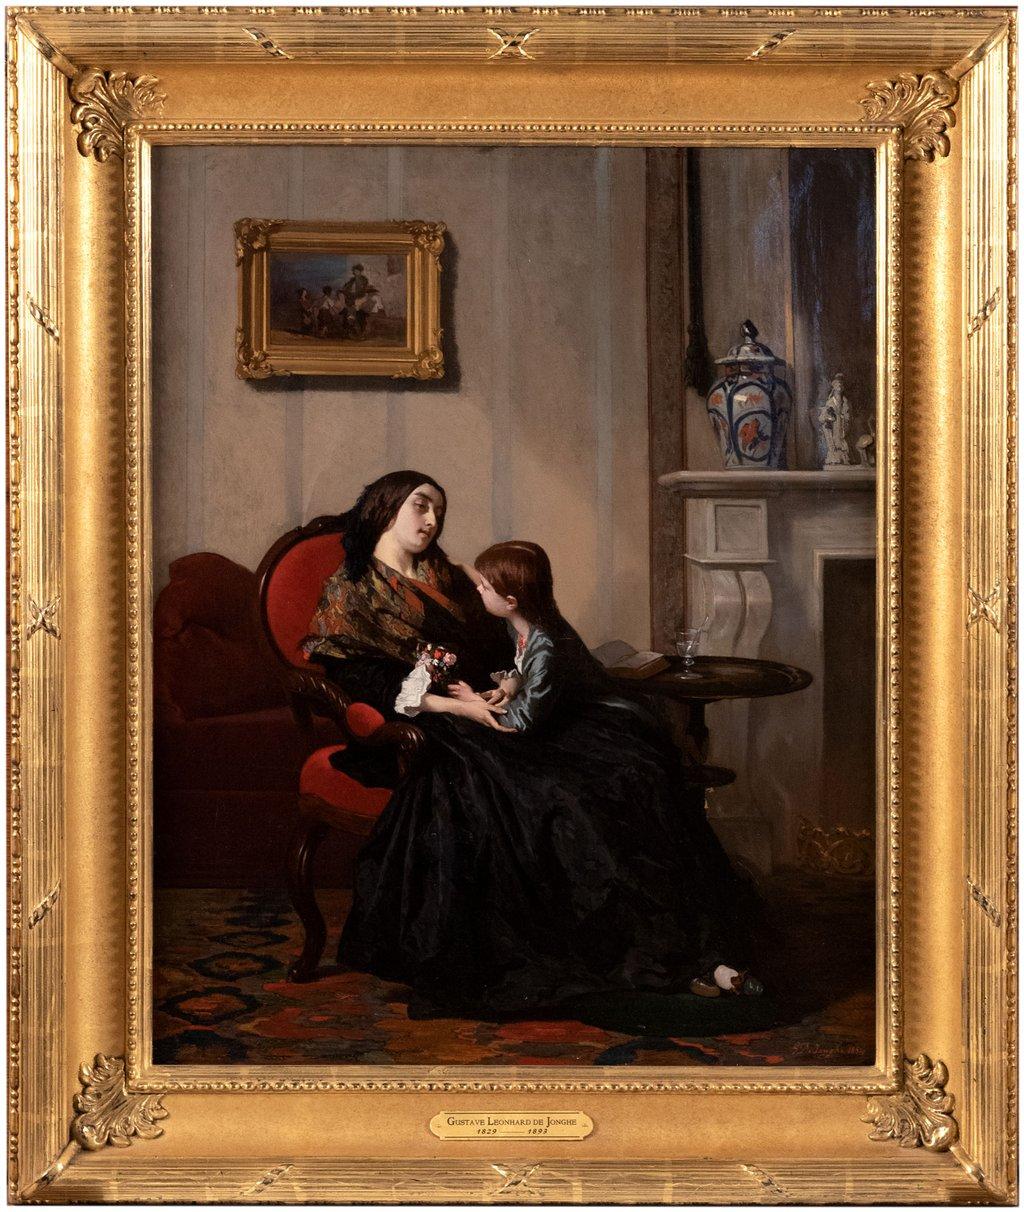 Flowers for Mother - Painting by Gustave Léonhard de Jonghe